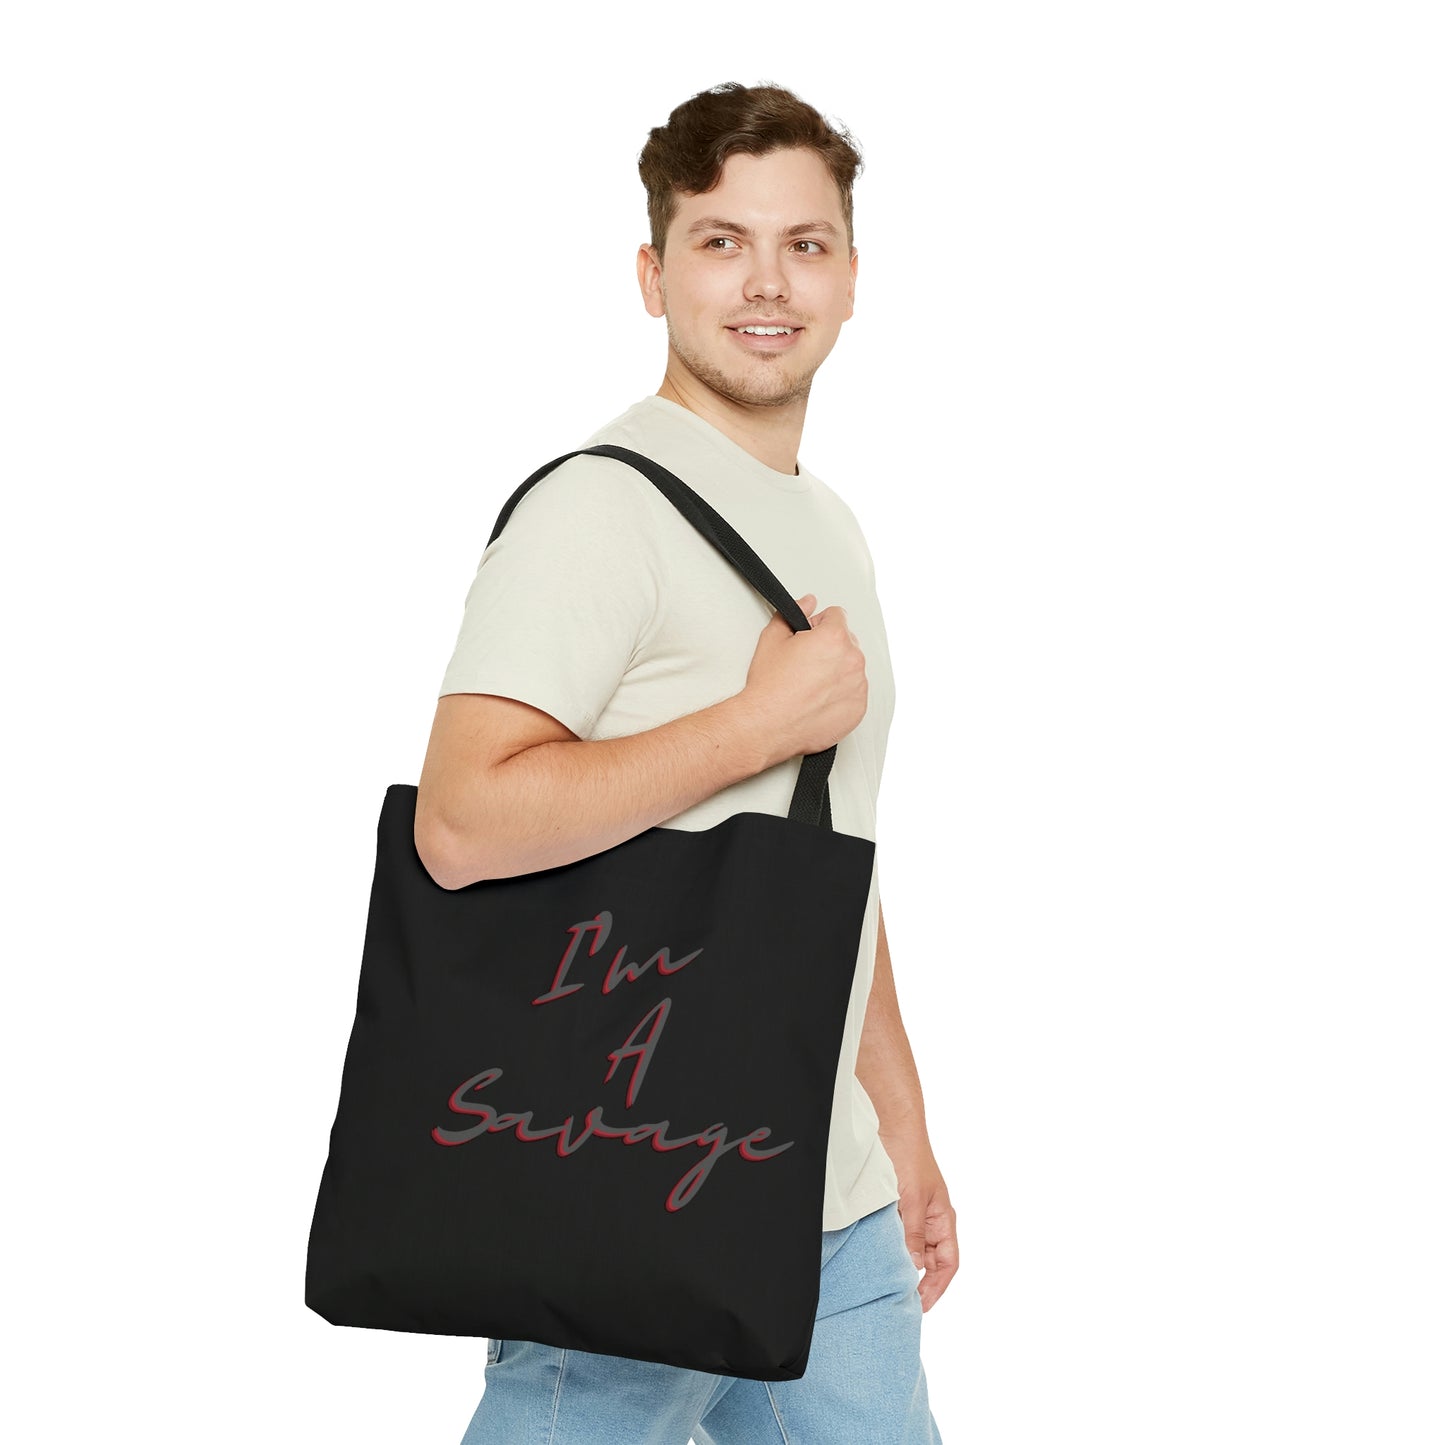 Savage AOP Tote Bag | BKLA | shoes & accessories | backpack, hat, phone cover, tote bags, clutch bags